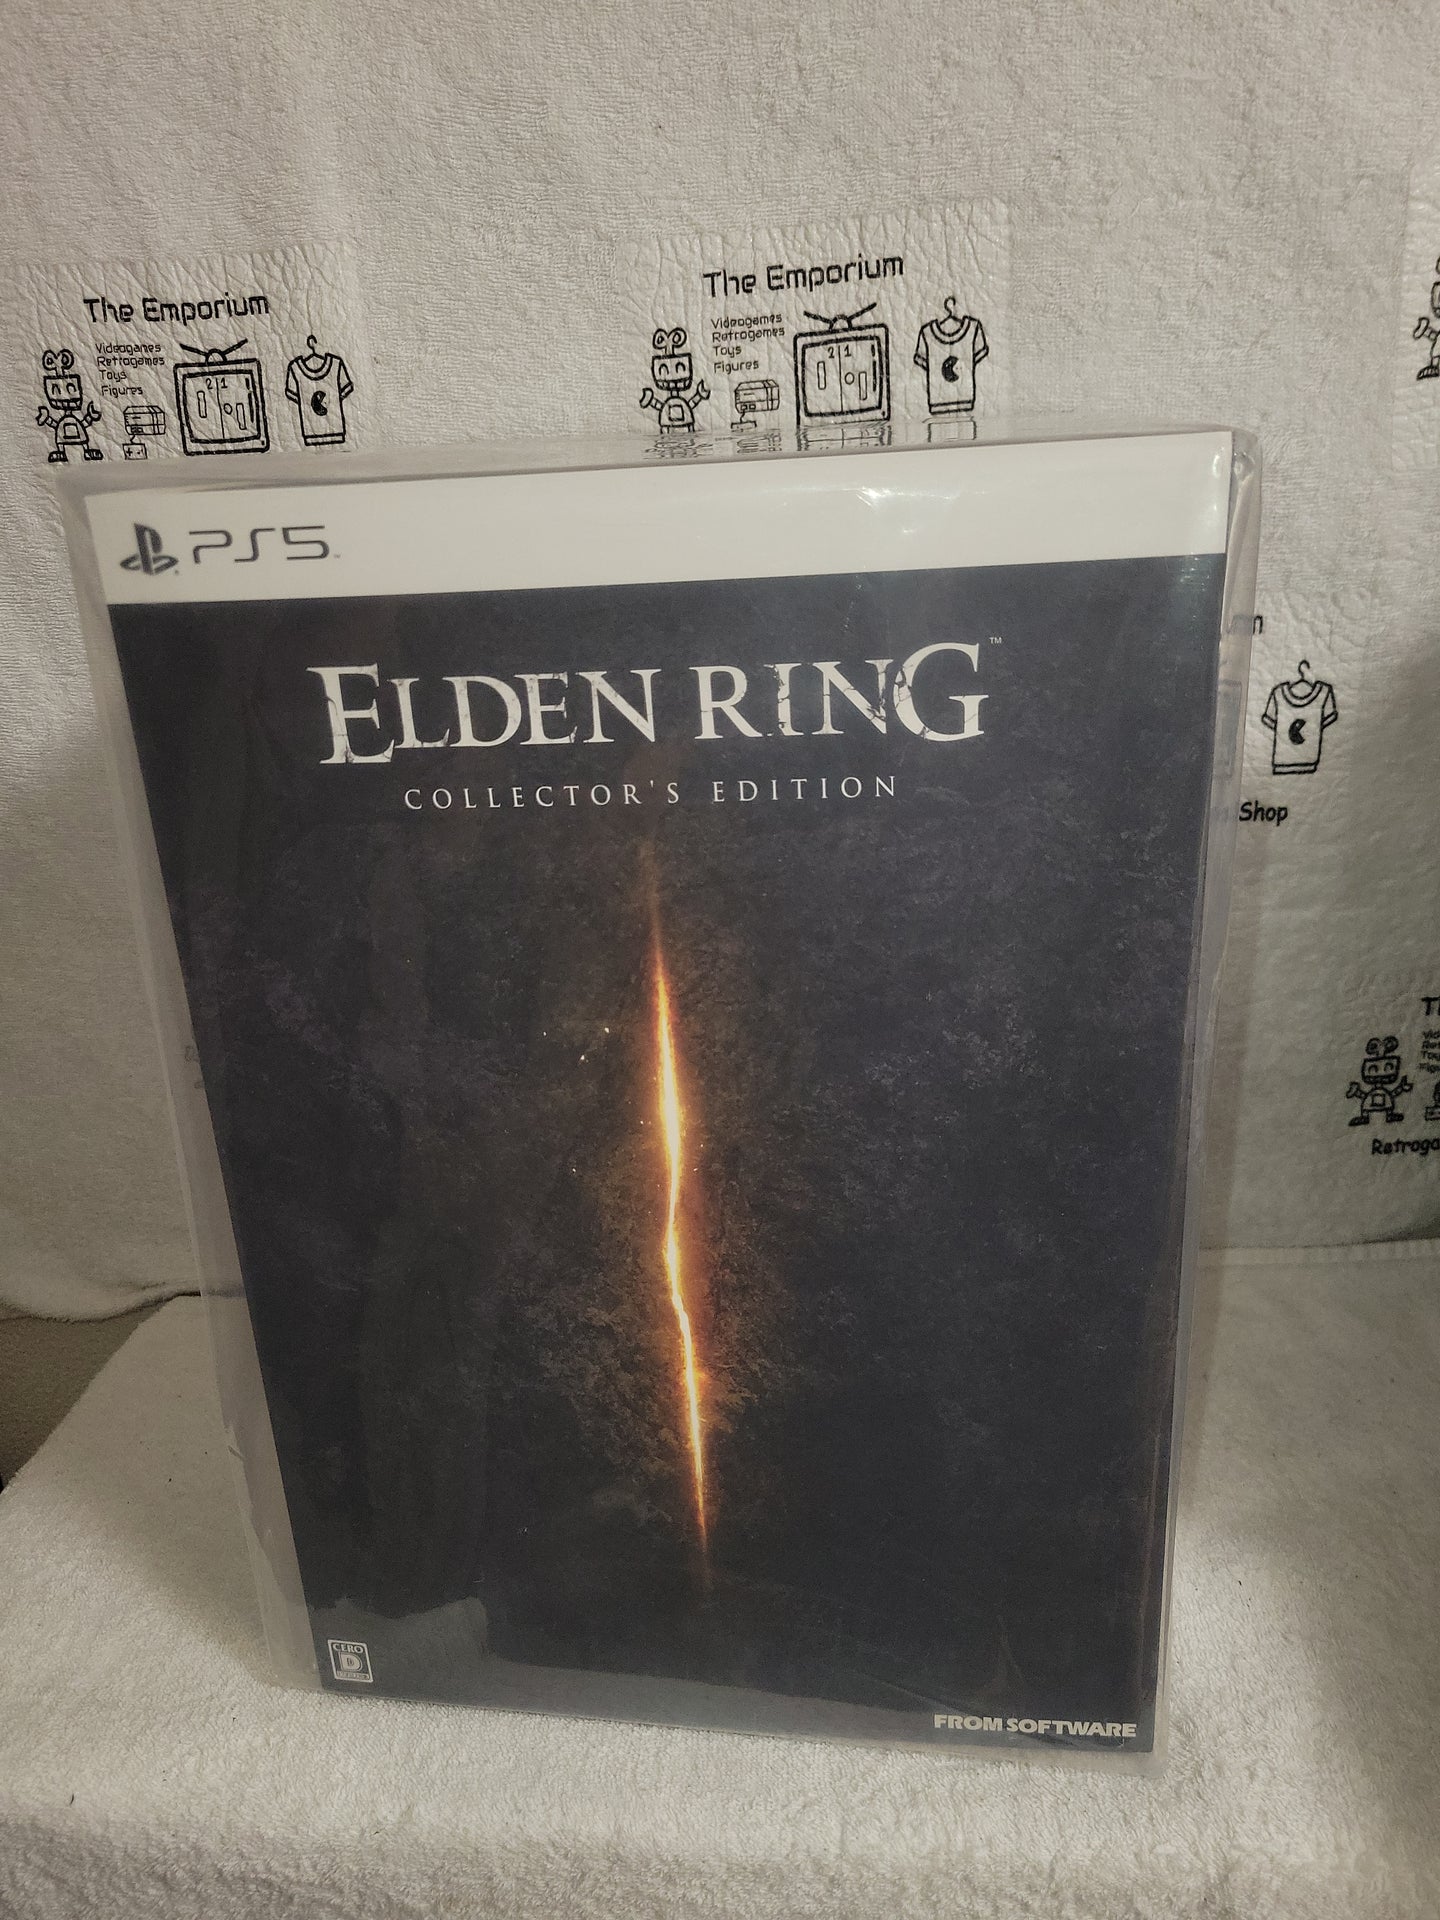 Elden Ring [Collector's Edition] - Sony PS5 Playstation 5